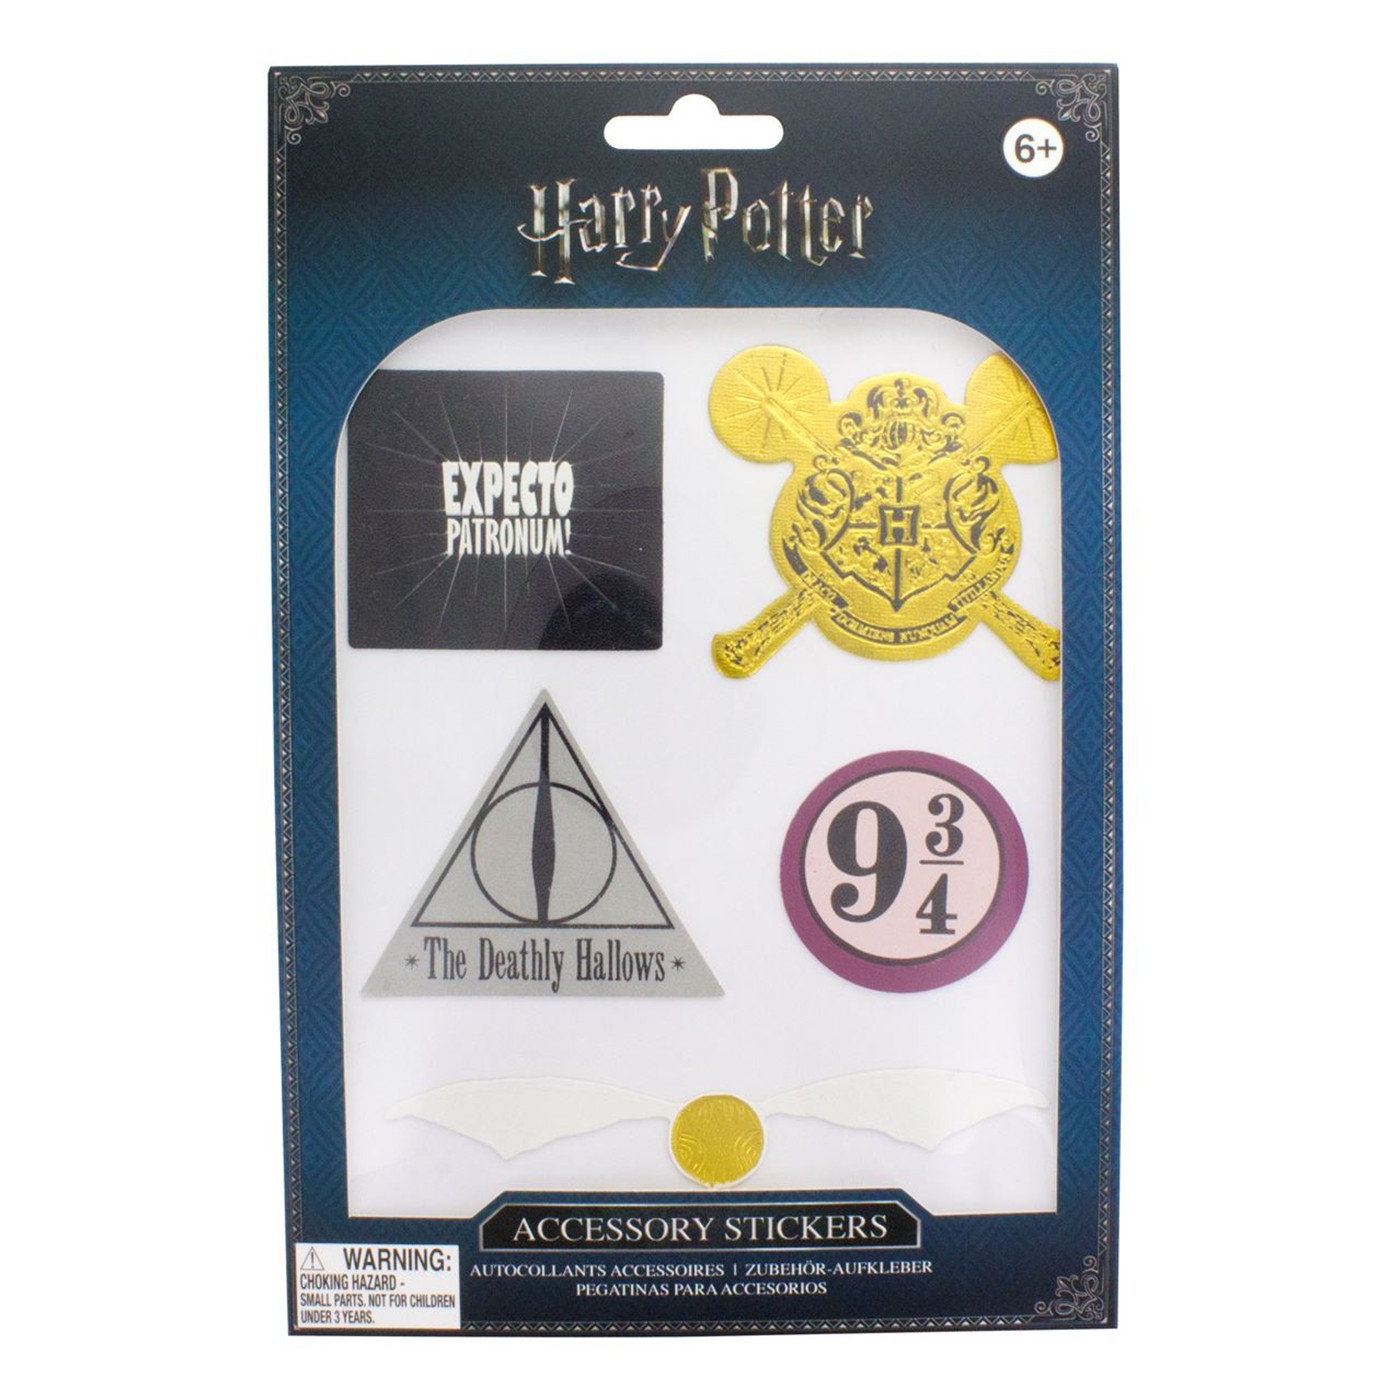 Harry Potter Accessory Stickers